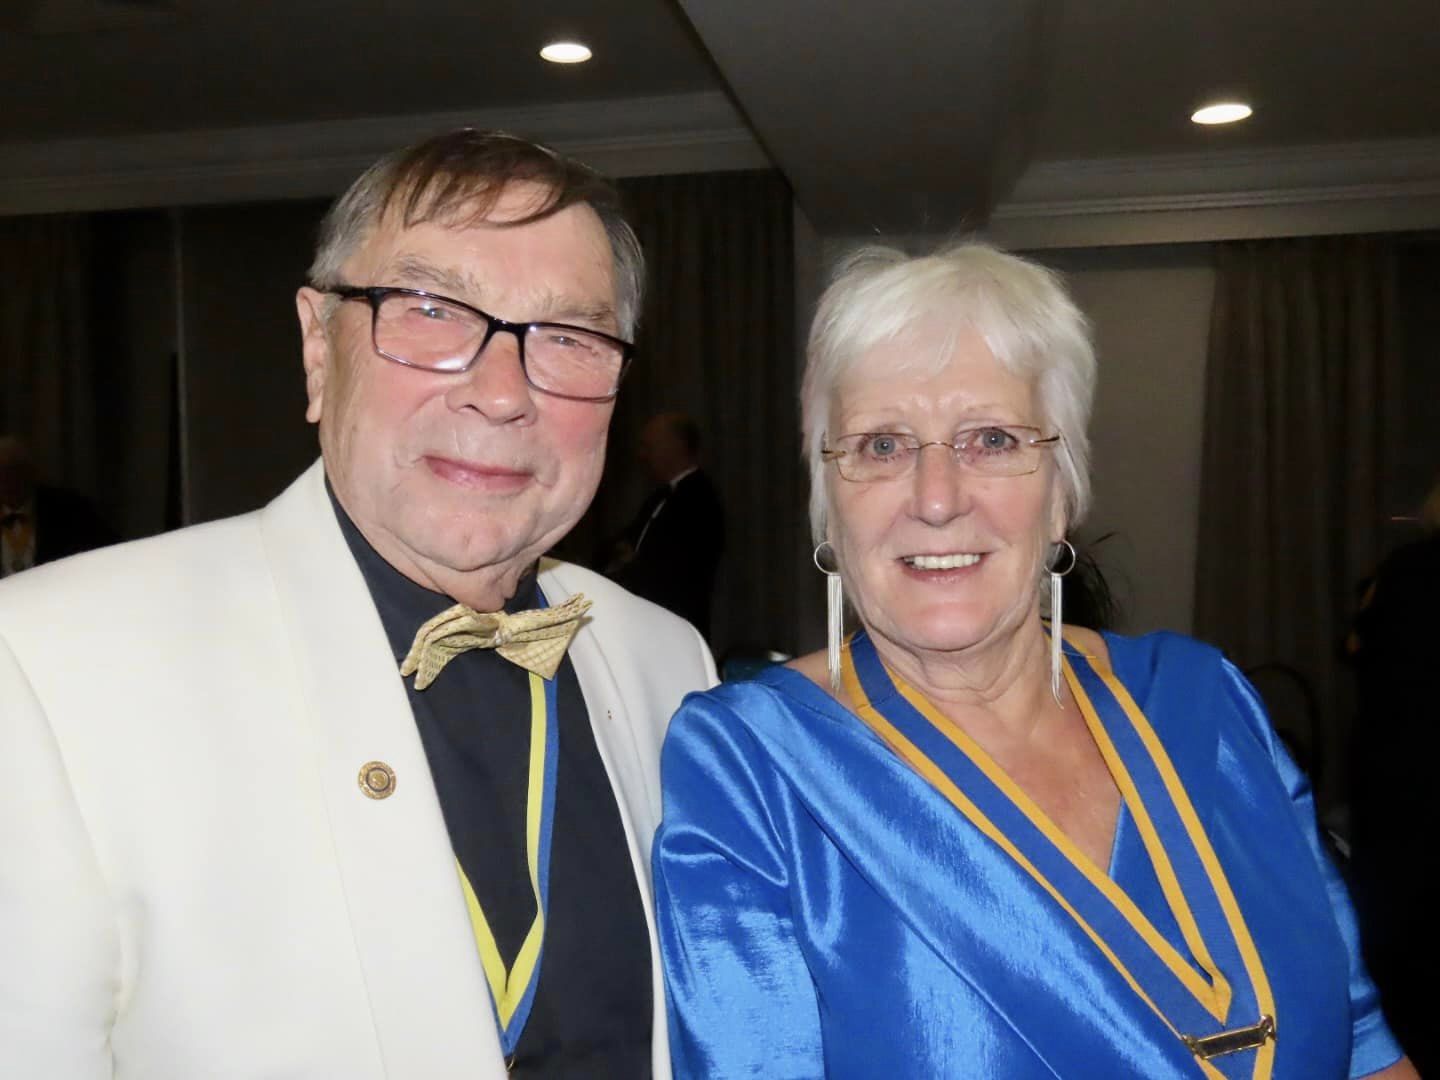 Guests enjoy the Rotary Club of Southport Centenary Charter Dinner. Terry Keefe and President Glenys Critchley. Photo by Andrew Brown Media